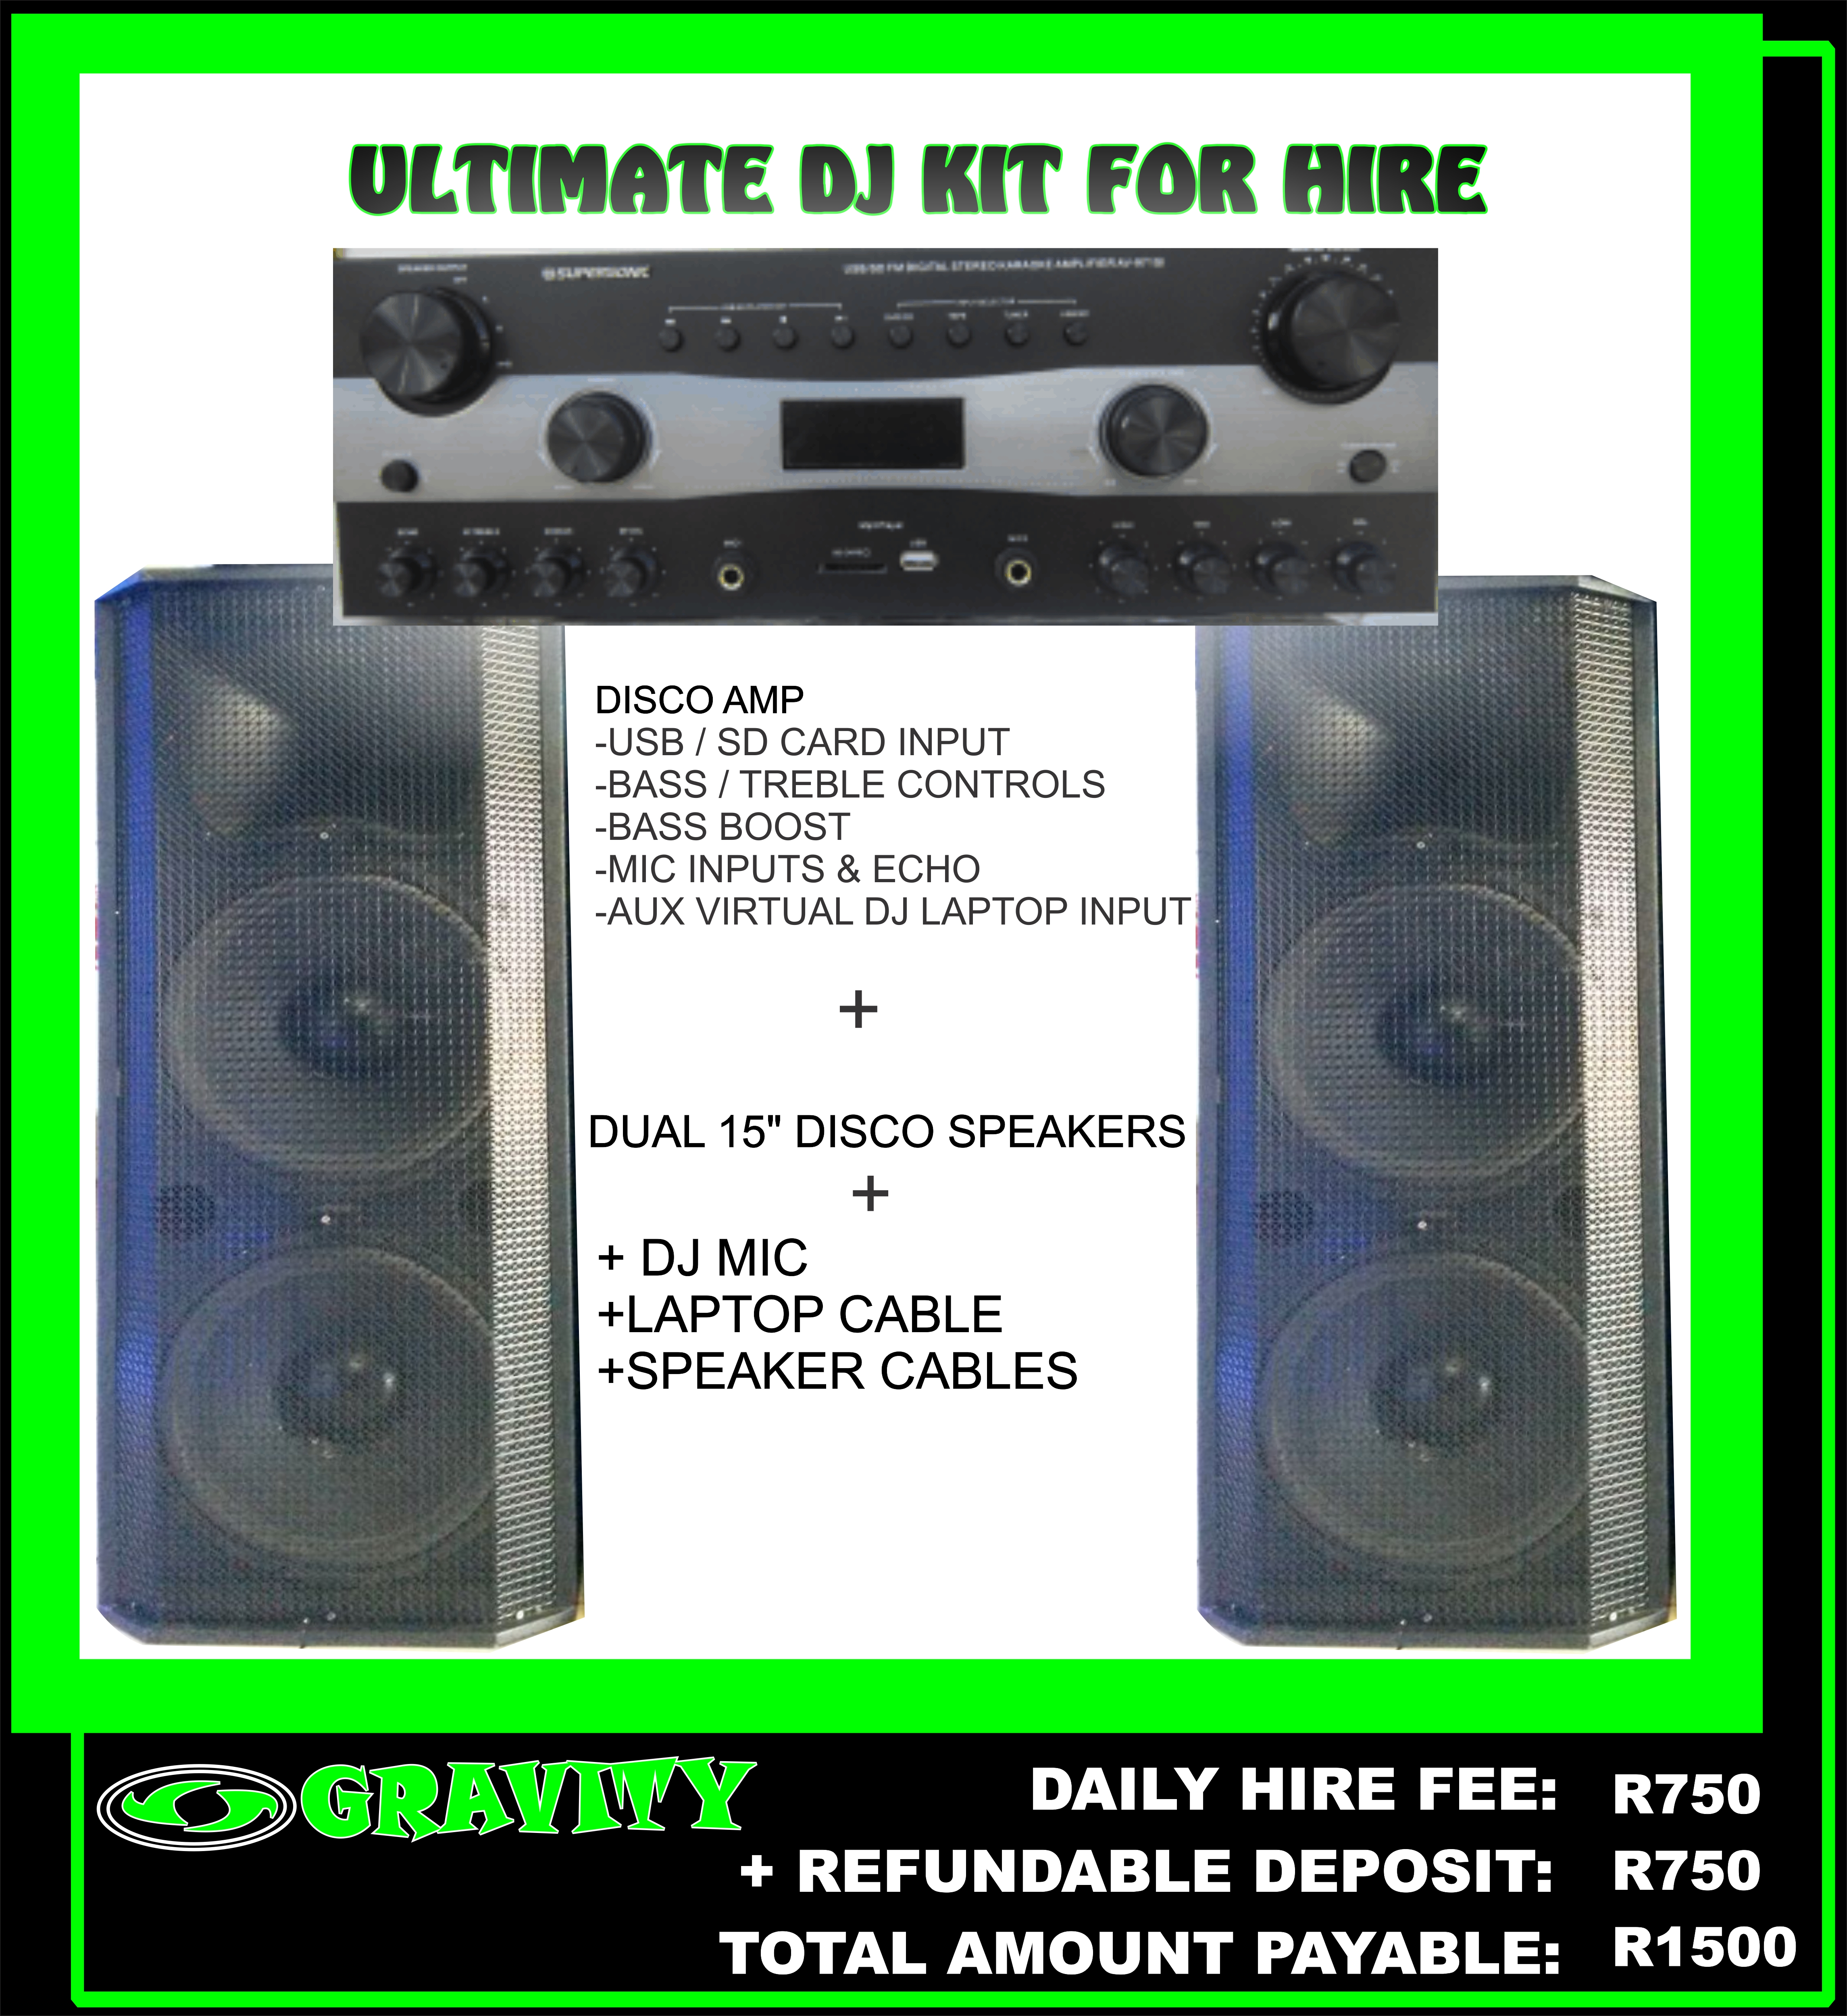 THE ULTIMATE DJ COMBO SOUND SYSTEM FOR HIRE  PLUG & PLAY SYSTEM  >DISCO AMPLIFIER   -700W   -USB & SD CARD INPUTS   -AUX VIRTUAL DJ LAPTOP INPUT   -MIC INPUTS & ECHO   -BASS BOOST  + DUAL 15